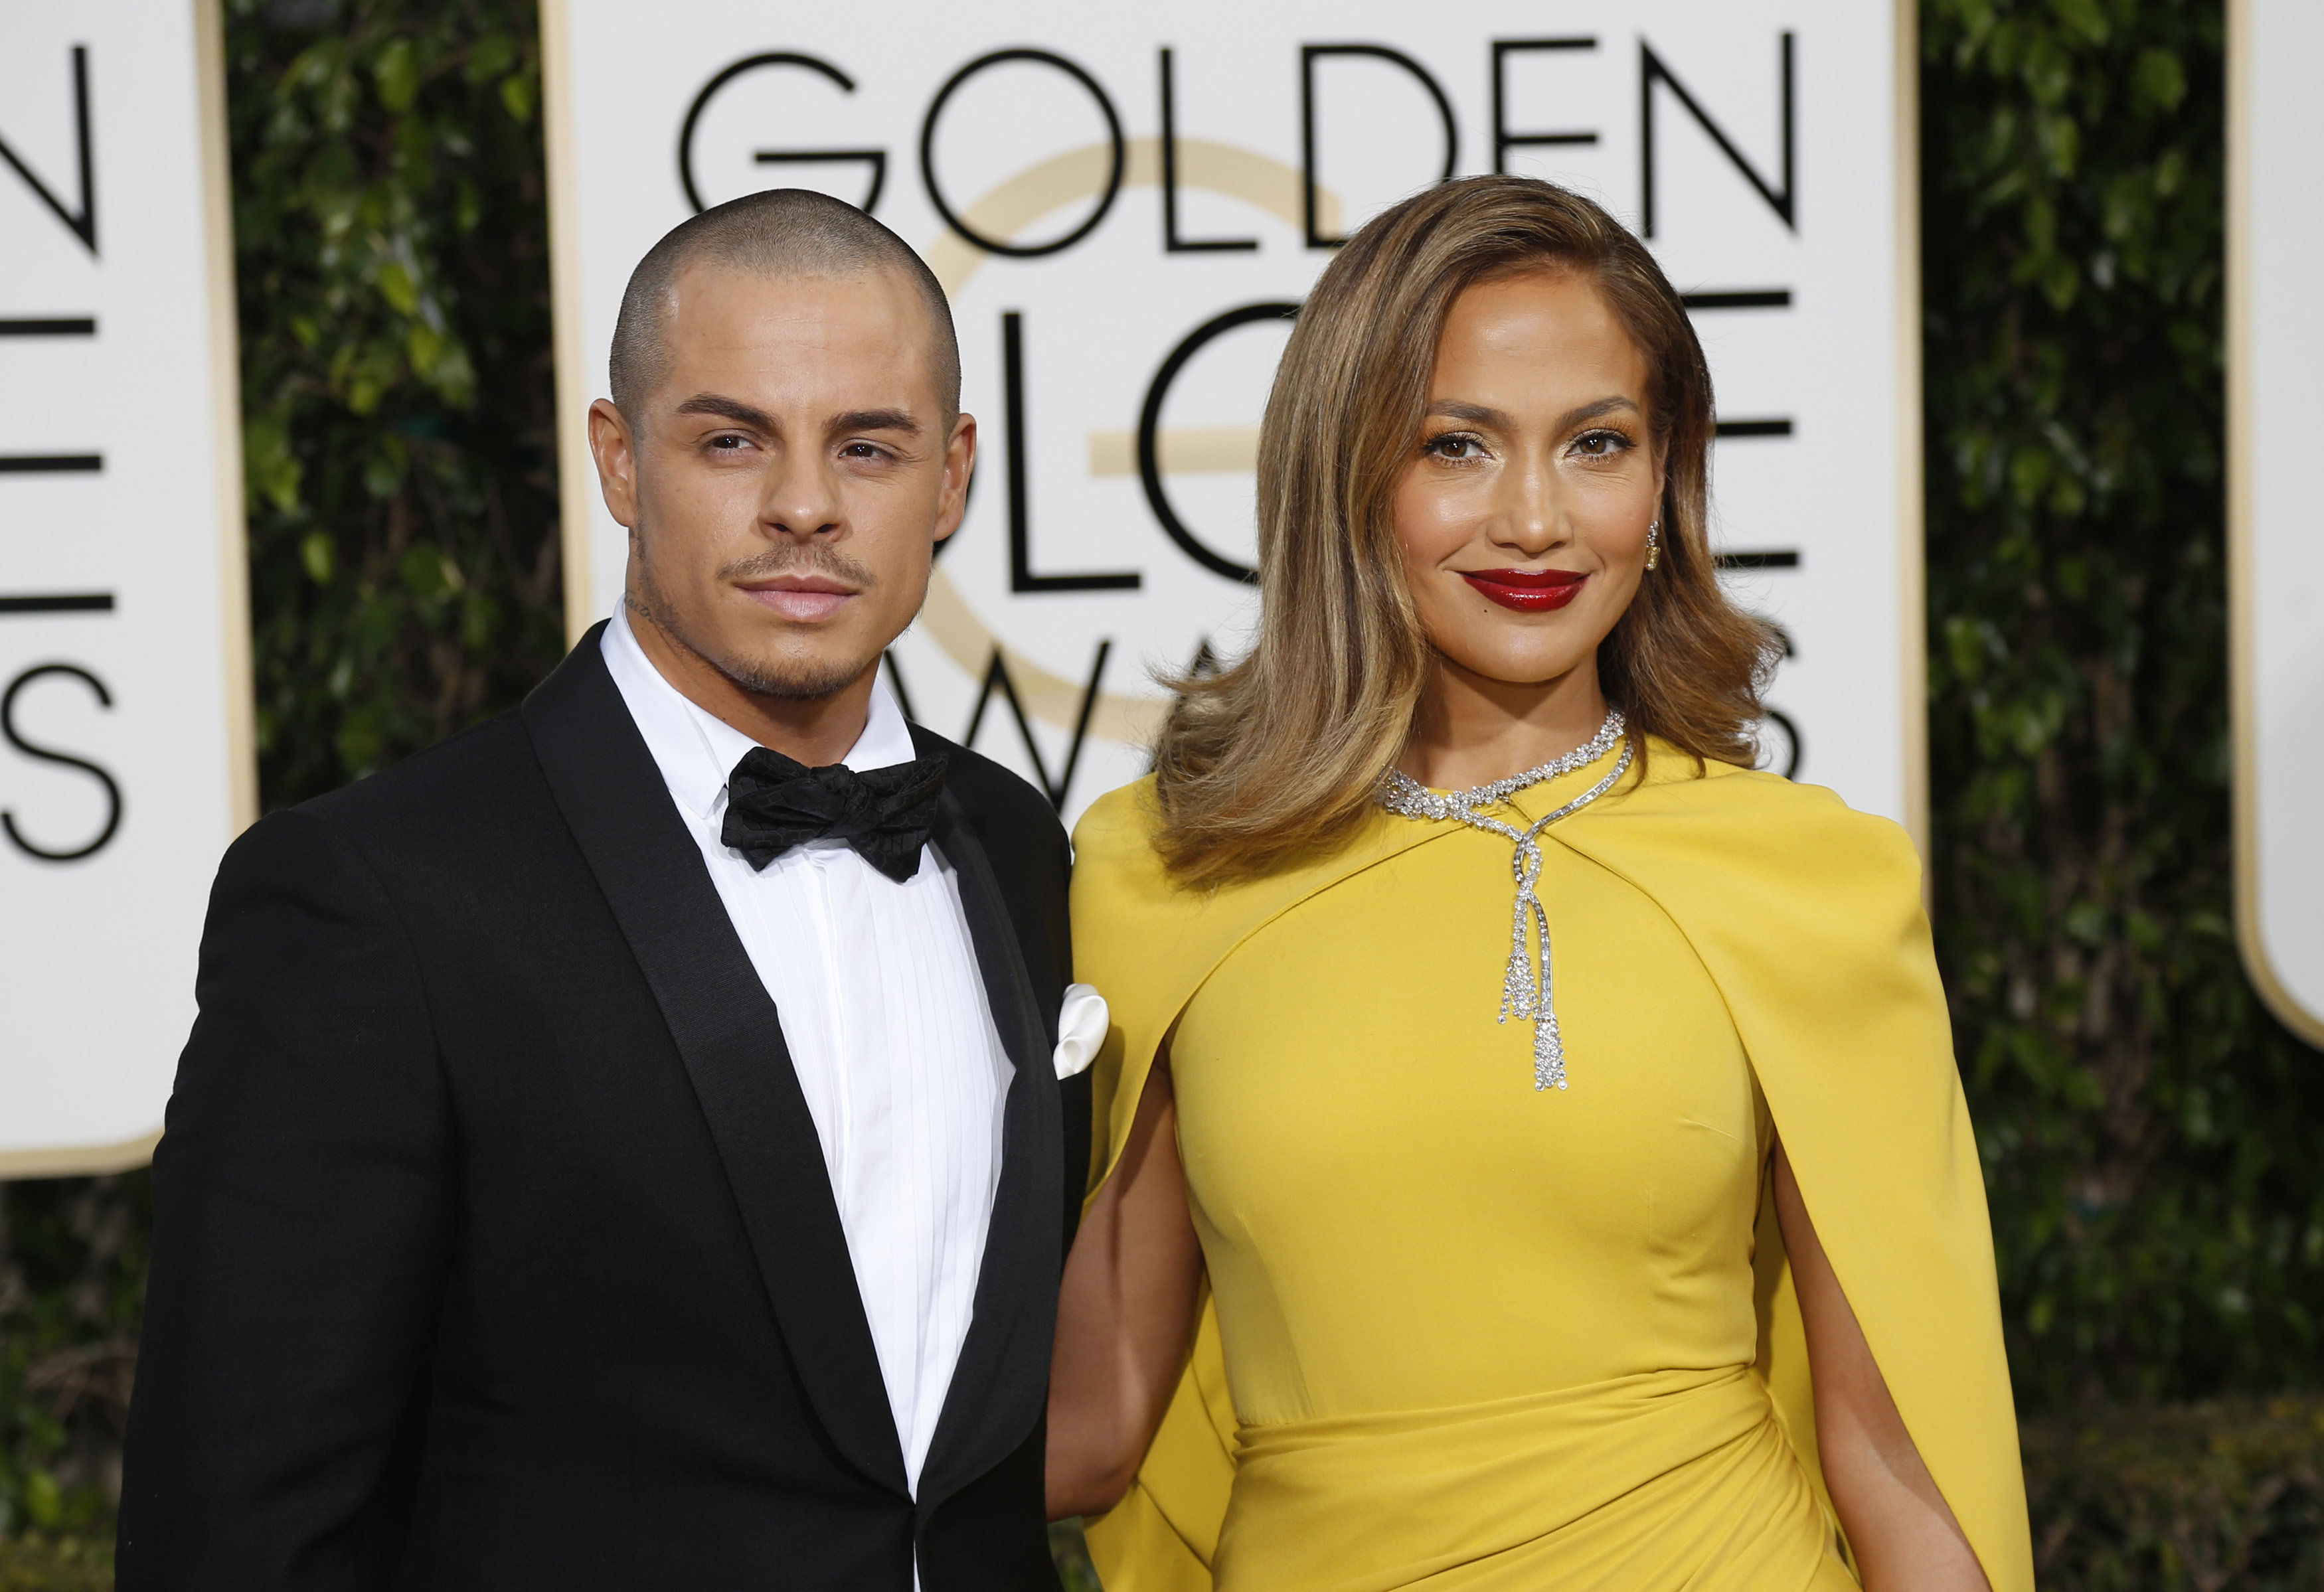 Jennifer Lopez Reportedly Splits With Casper Smart After Cheating Allegations Surface HuffPost Entertainment pic